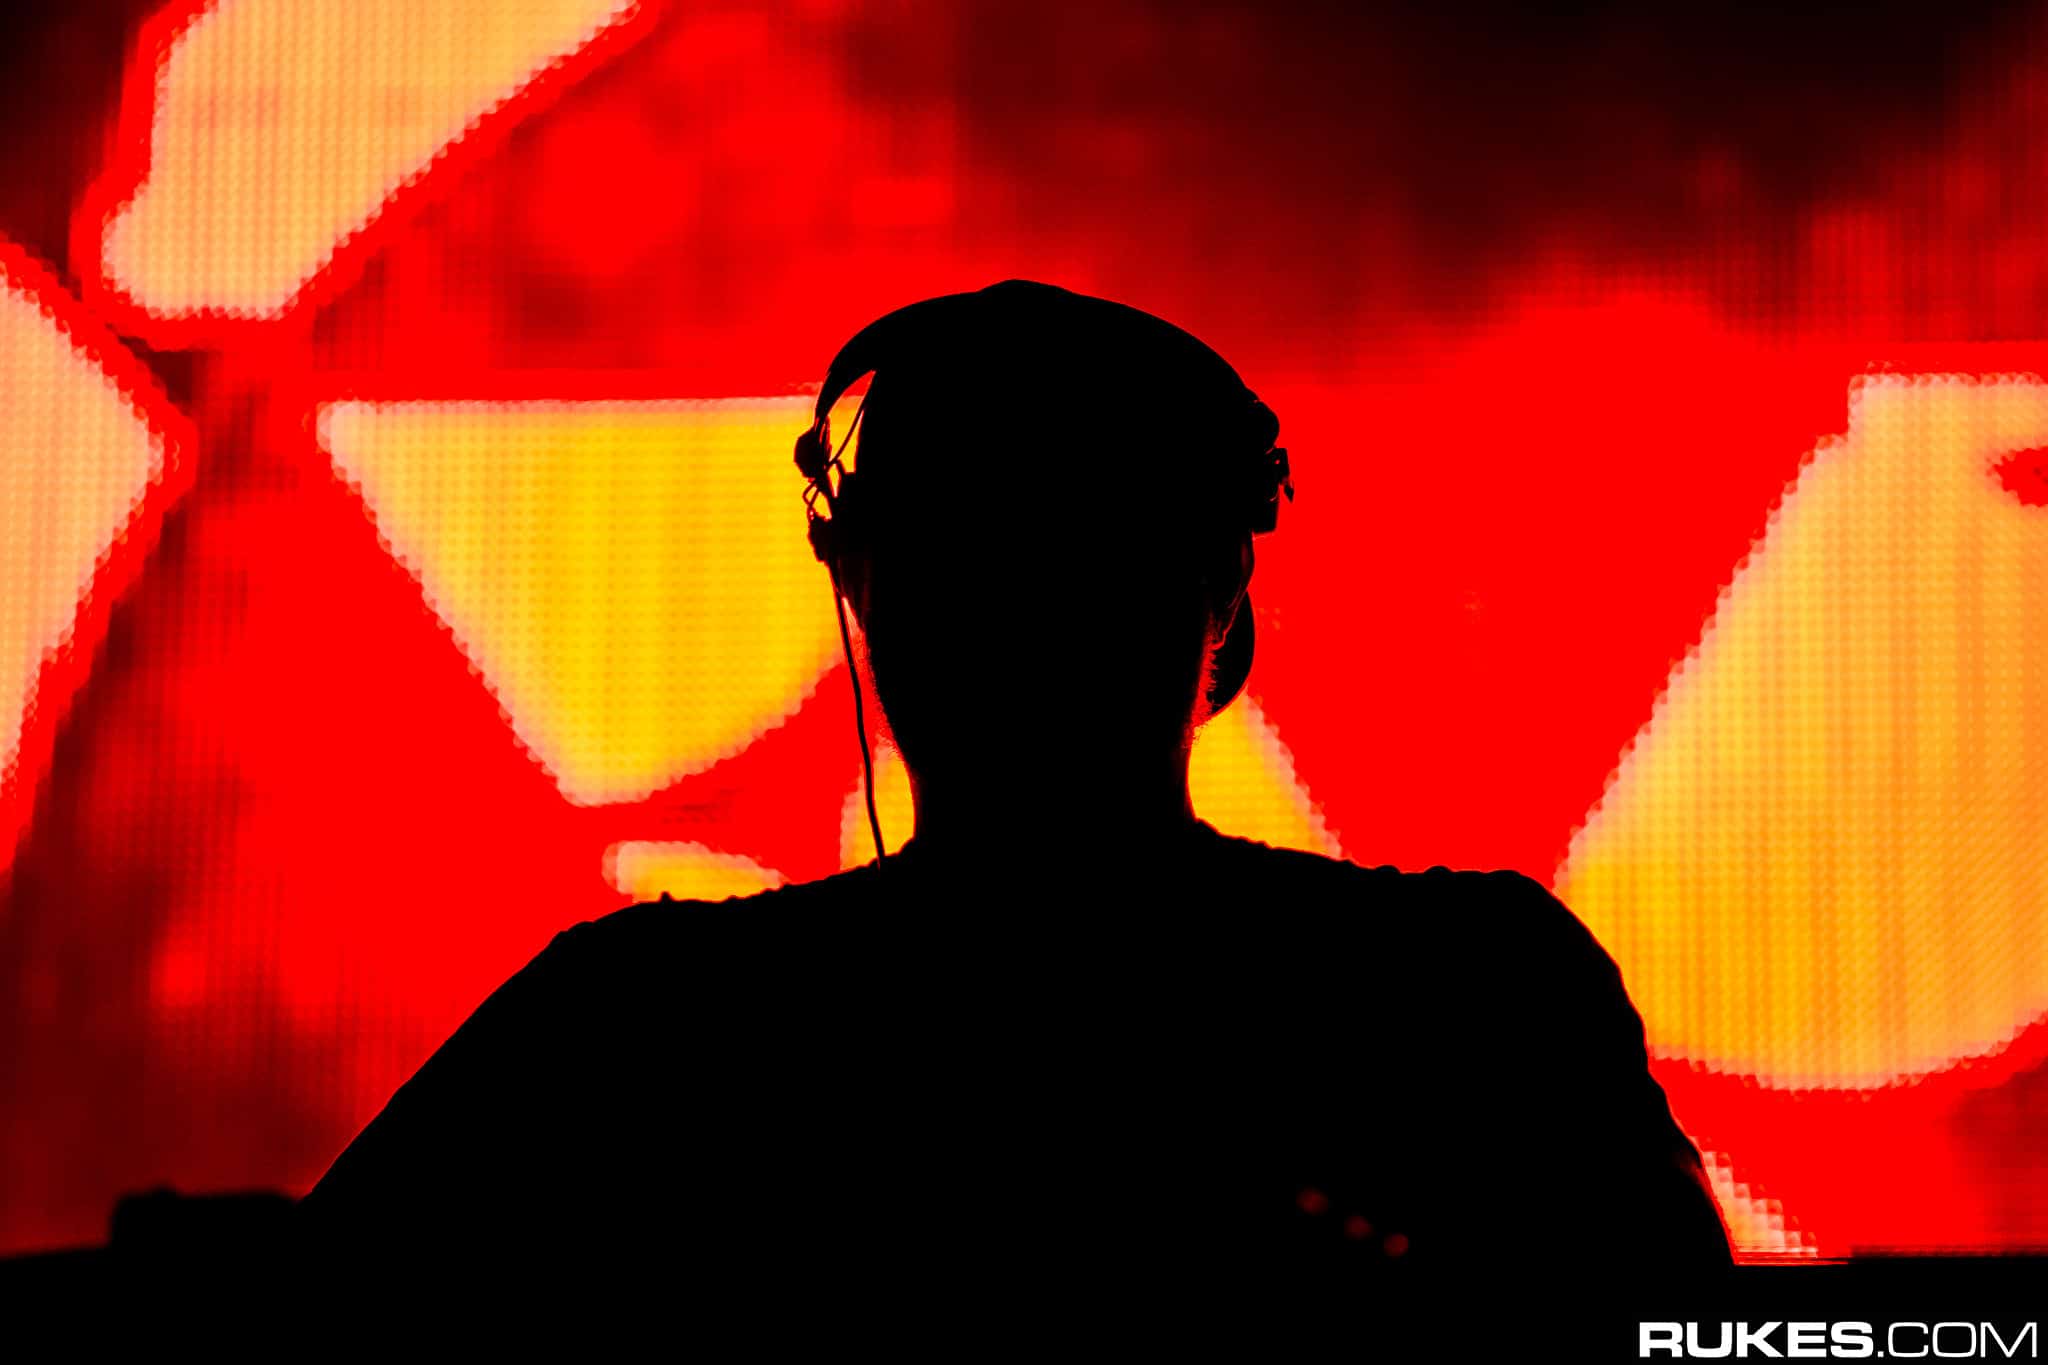 Eric Prydz announces huge new U.K show alongside Camelphat, Cristoph, and Franky Wah